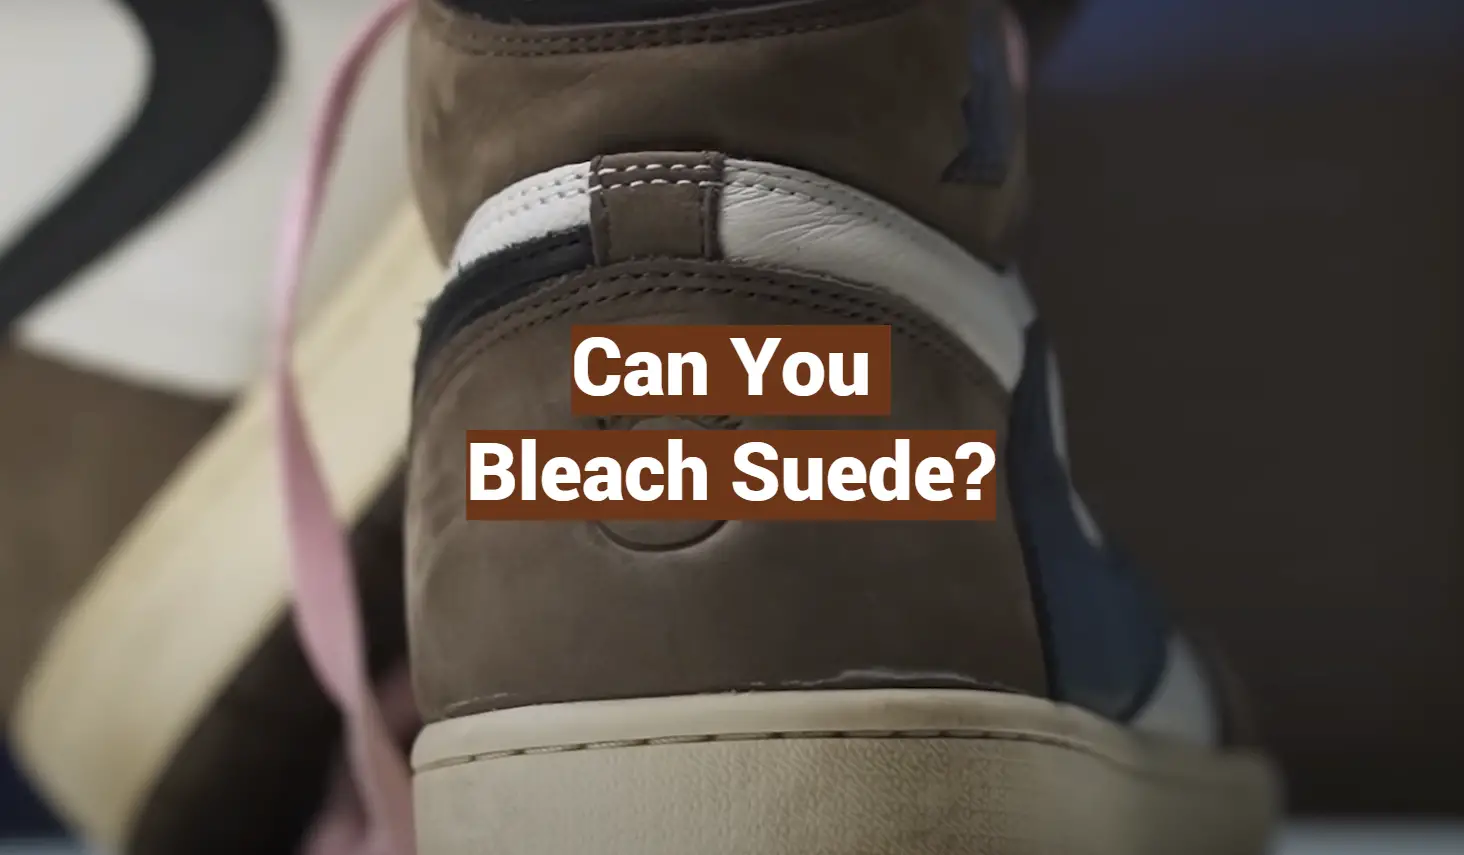 Can You Bleach Suede?